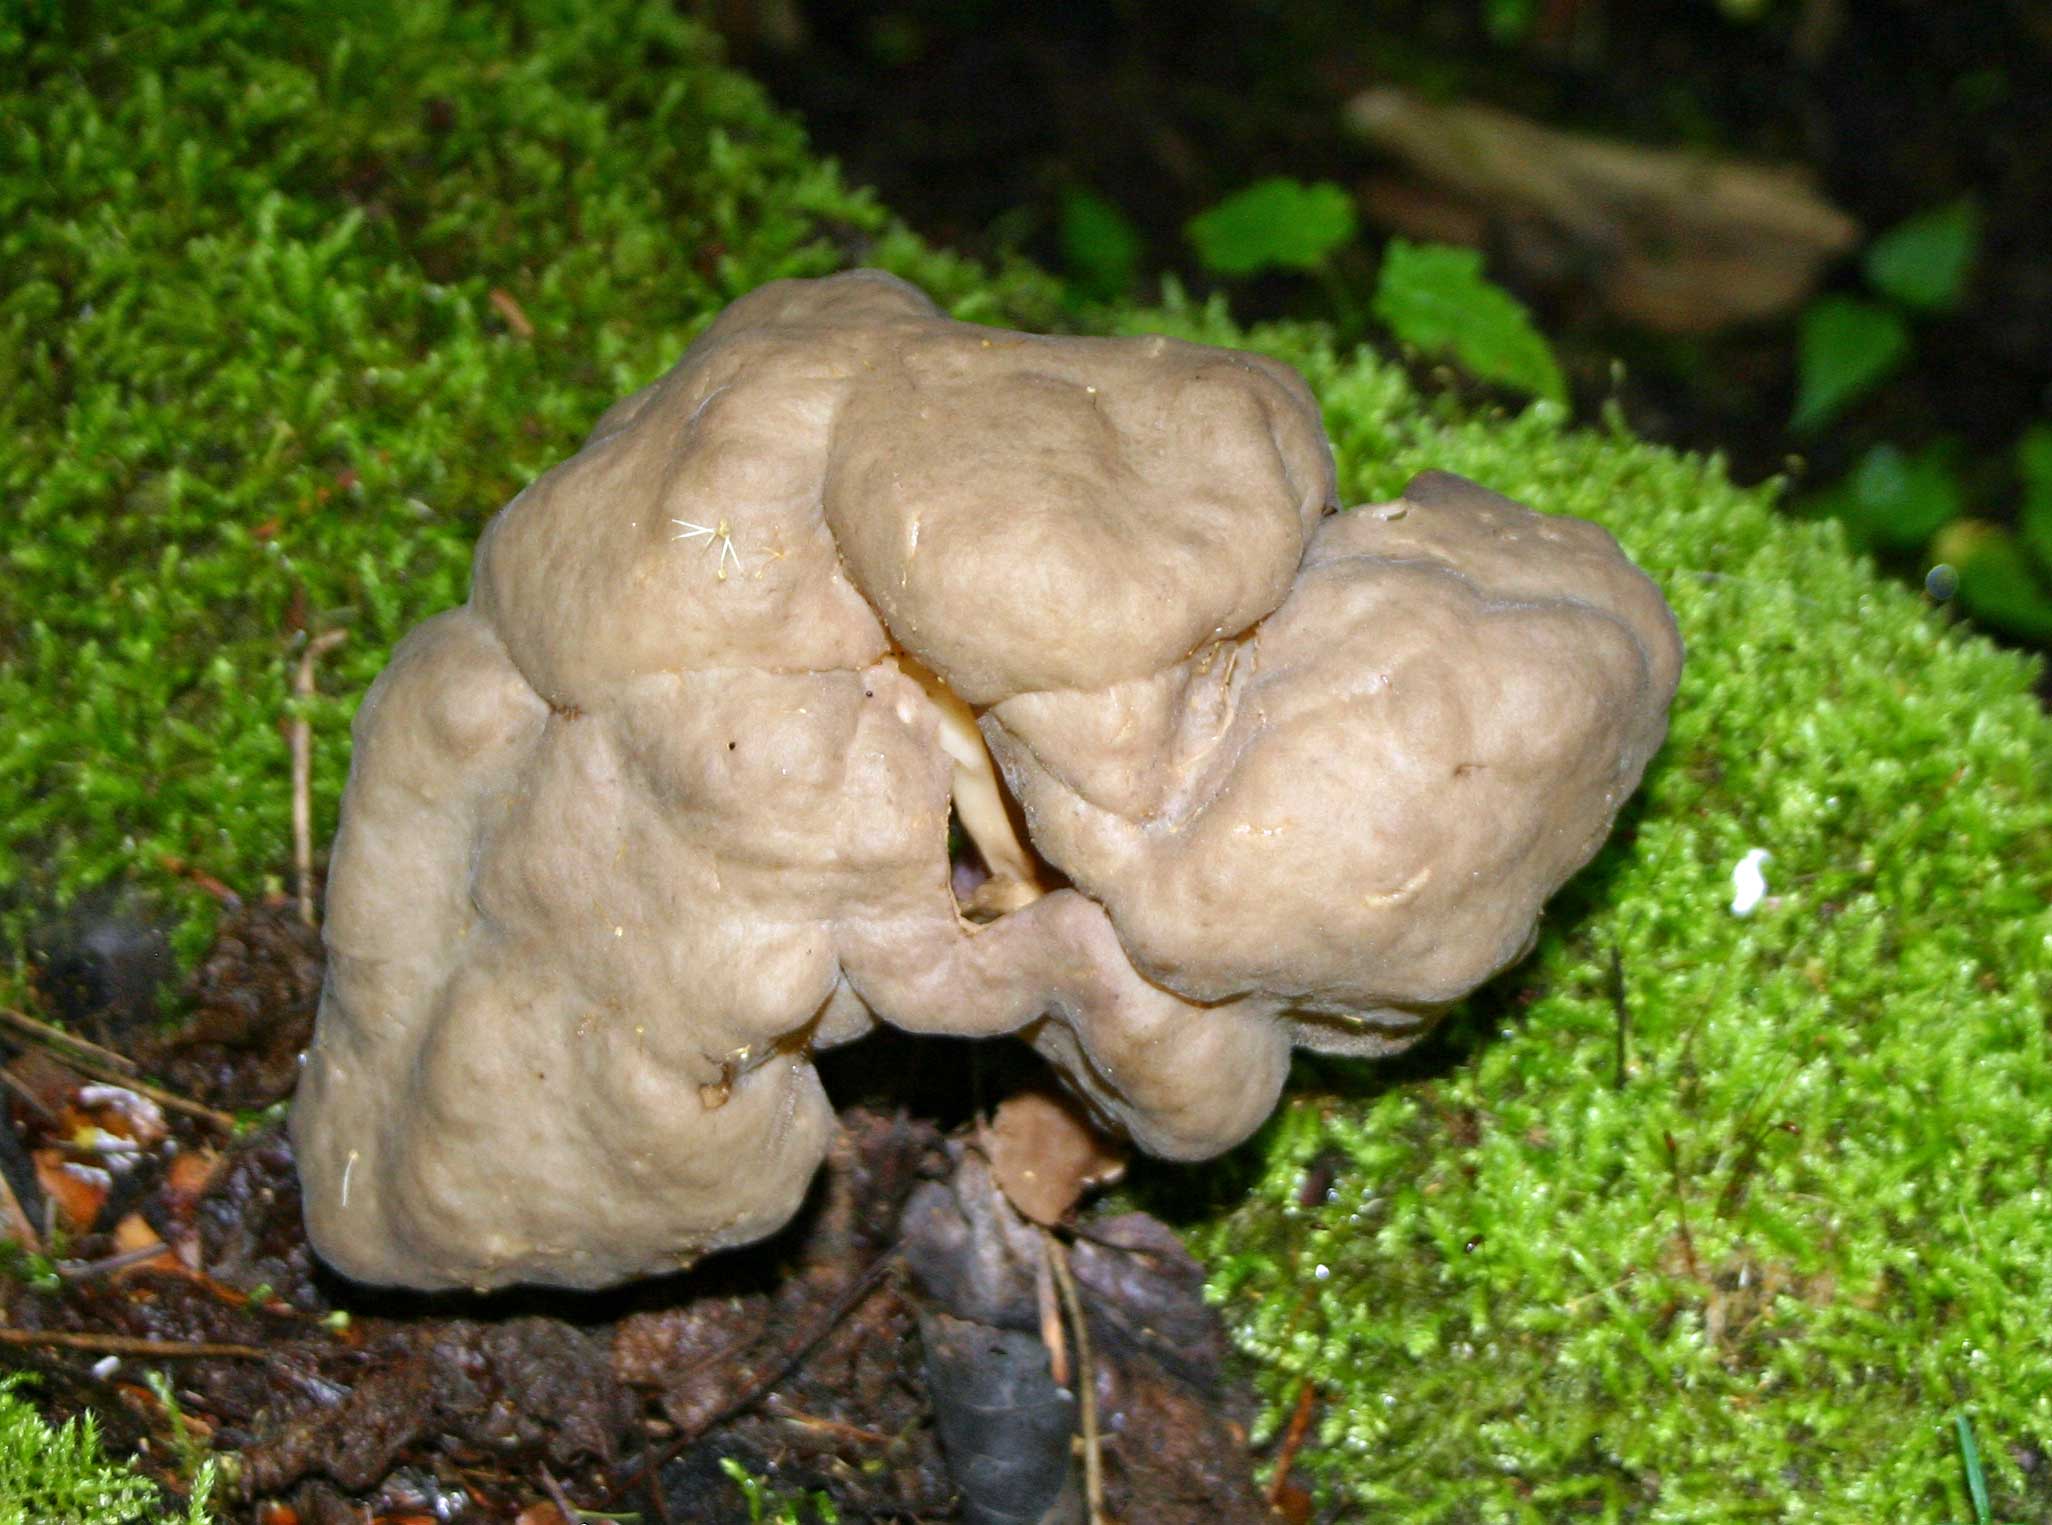 A vaguely brain-shaped taupe mushroom growing near green lichens.